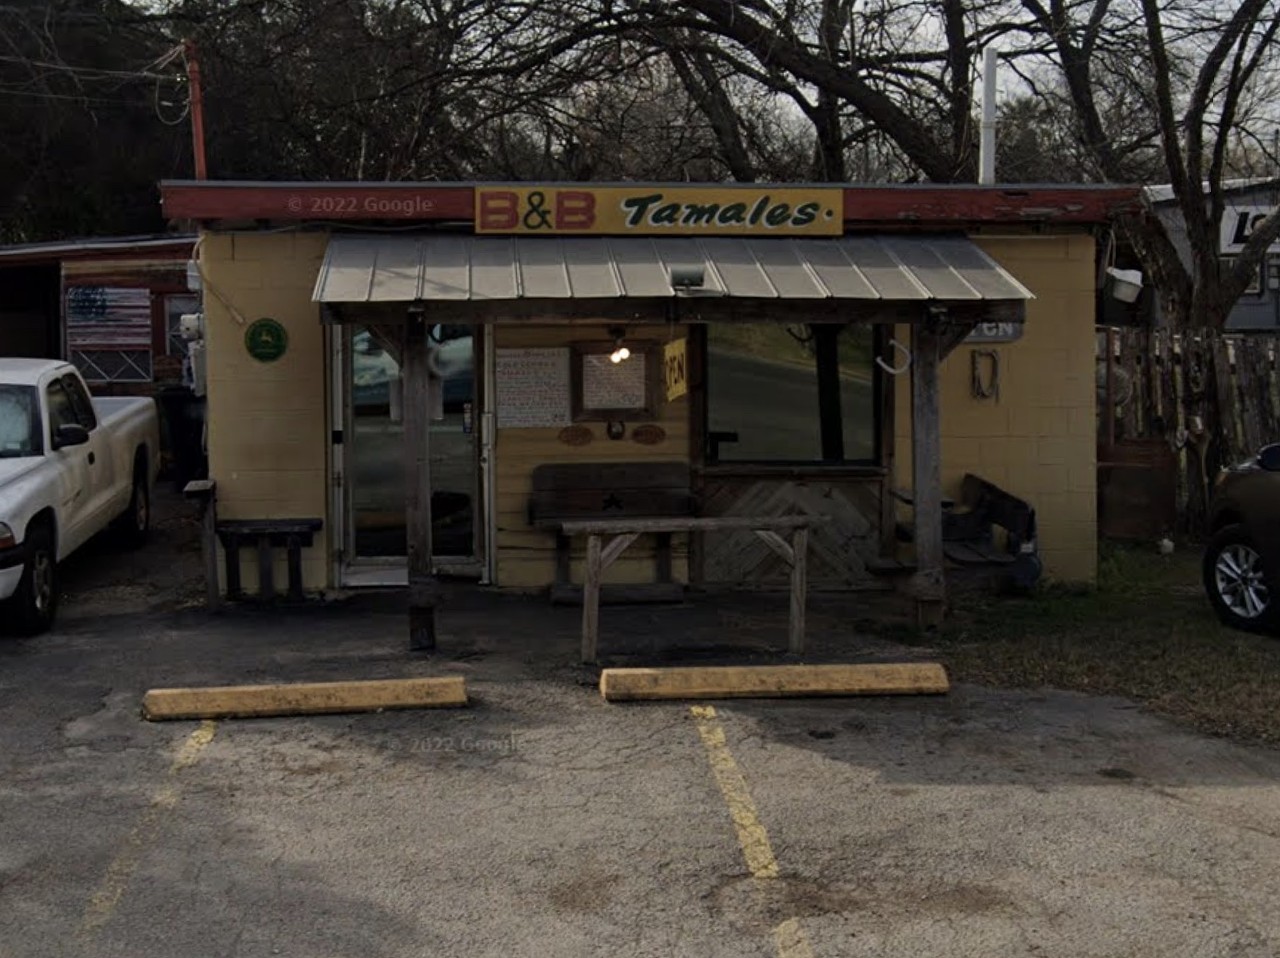 B & B Tamales and Food To Go
866 W. Mayfield Blvd., (210) 921-0847
While this little tamale shop may not look like much from the street, locals can attest to its craveable tamales and barbacoa, and the friendly staff. Be sure to stock up if you’re not in the neighborhood — we promise their tamales are just as tasty when you reheat them.